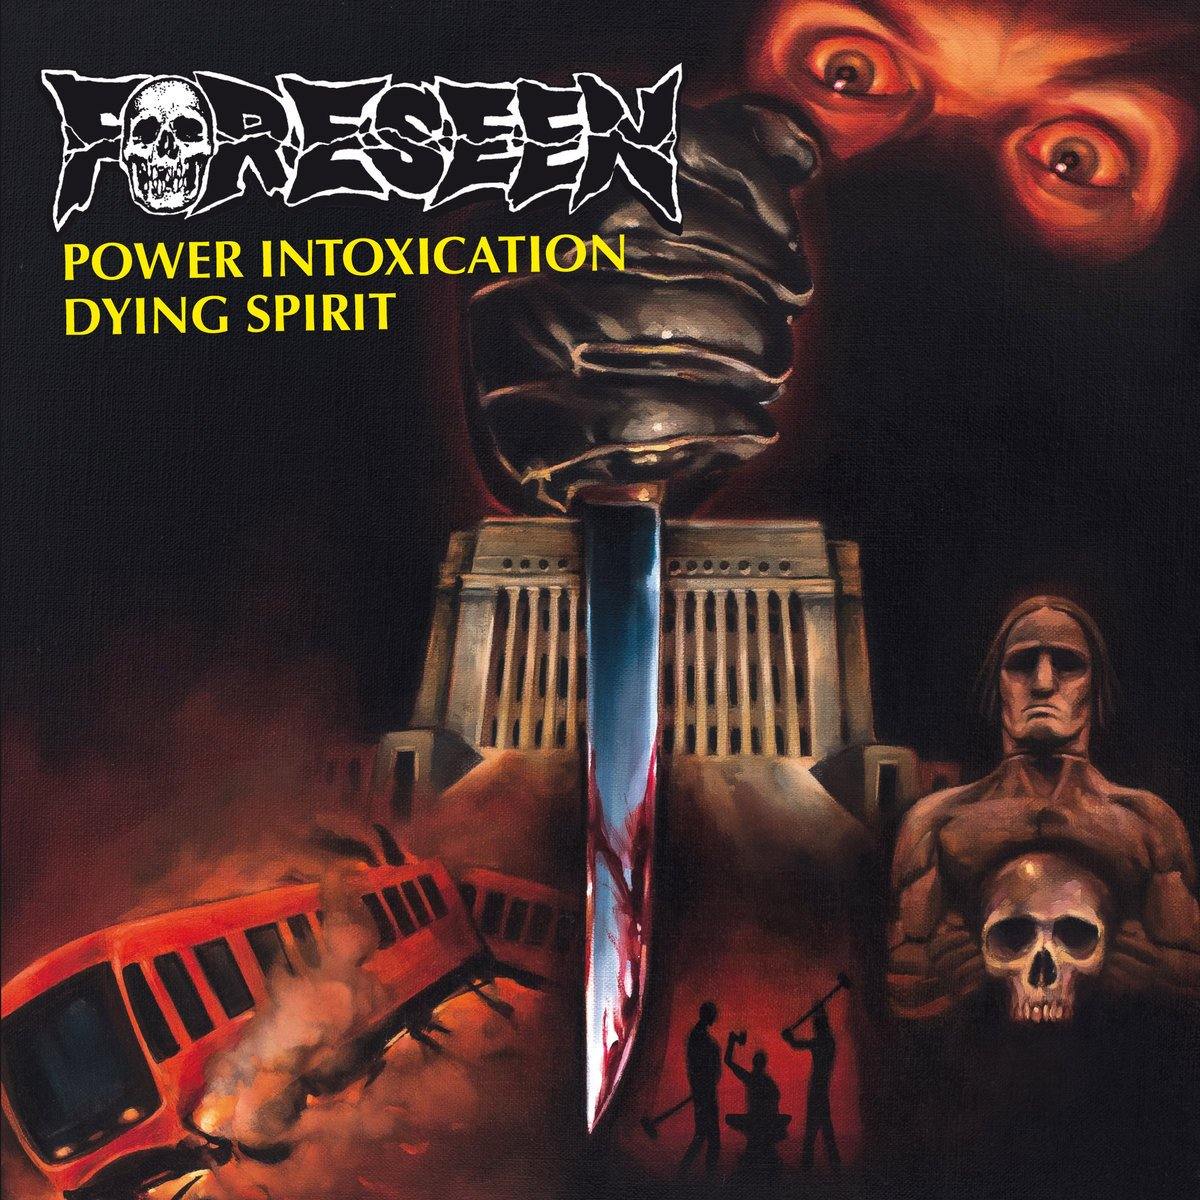 Buy – Foreseen "Power Intoxication" 7" – Band & Music Merch – Cold Cuts Merch